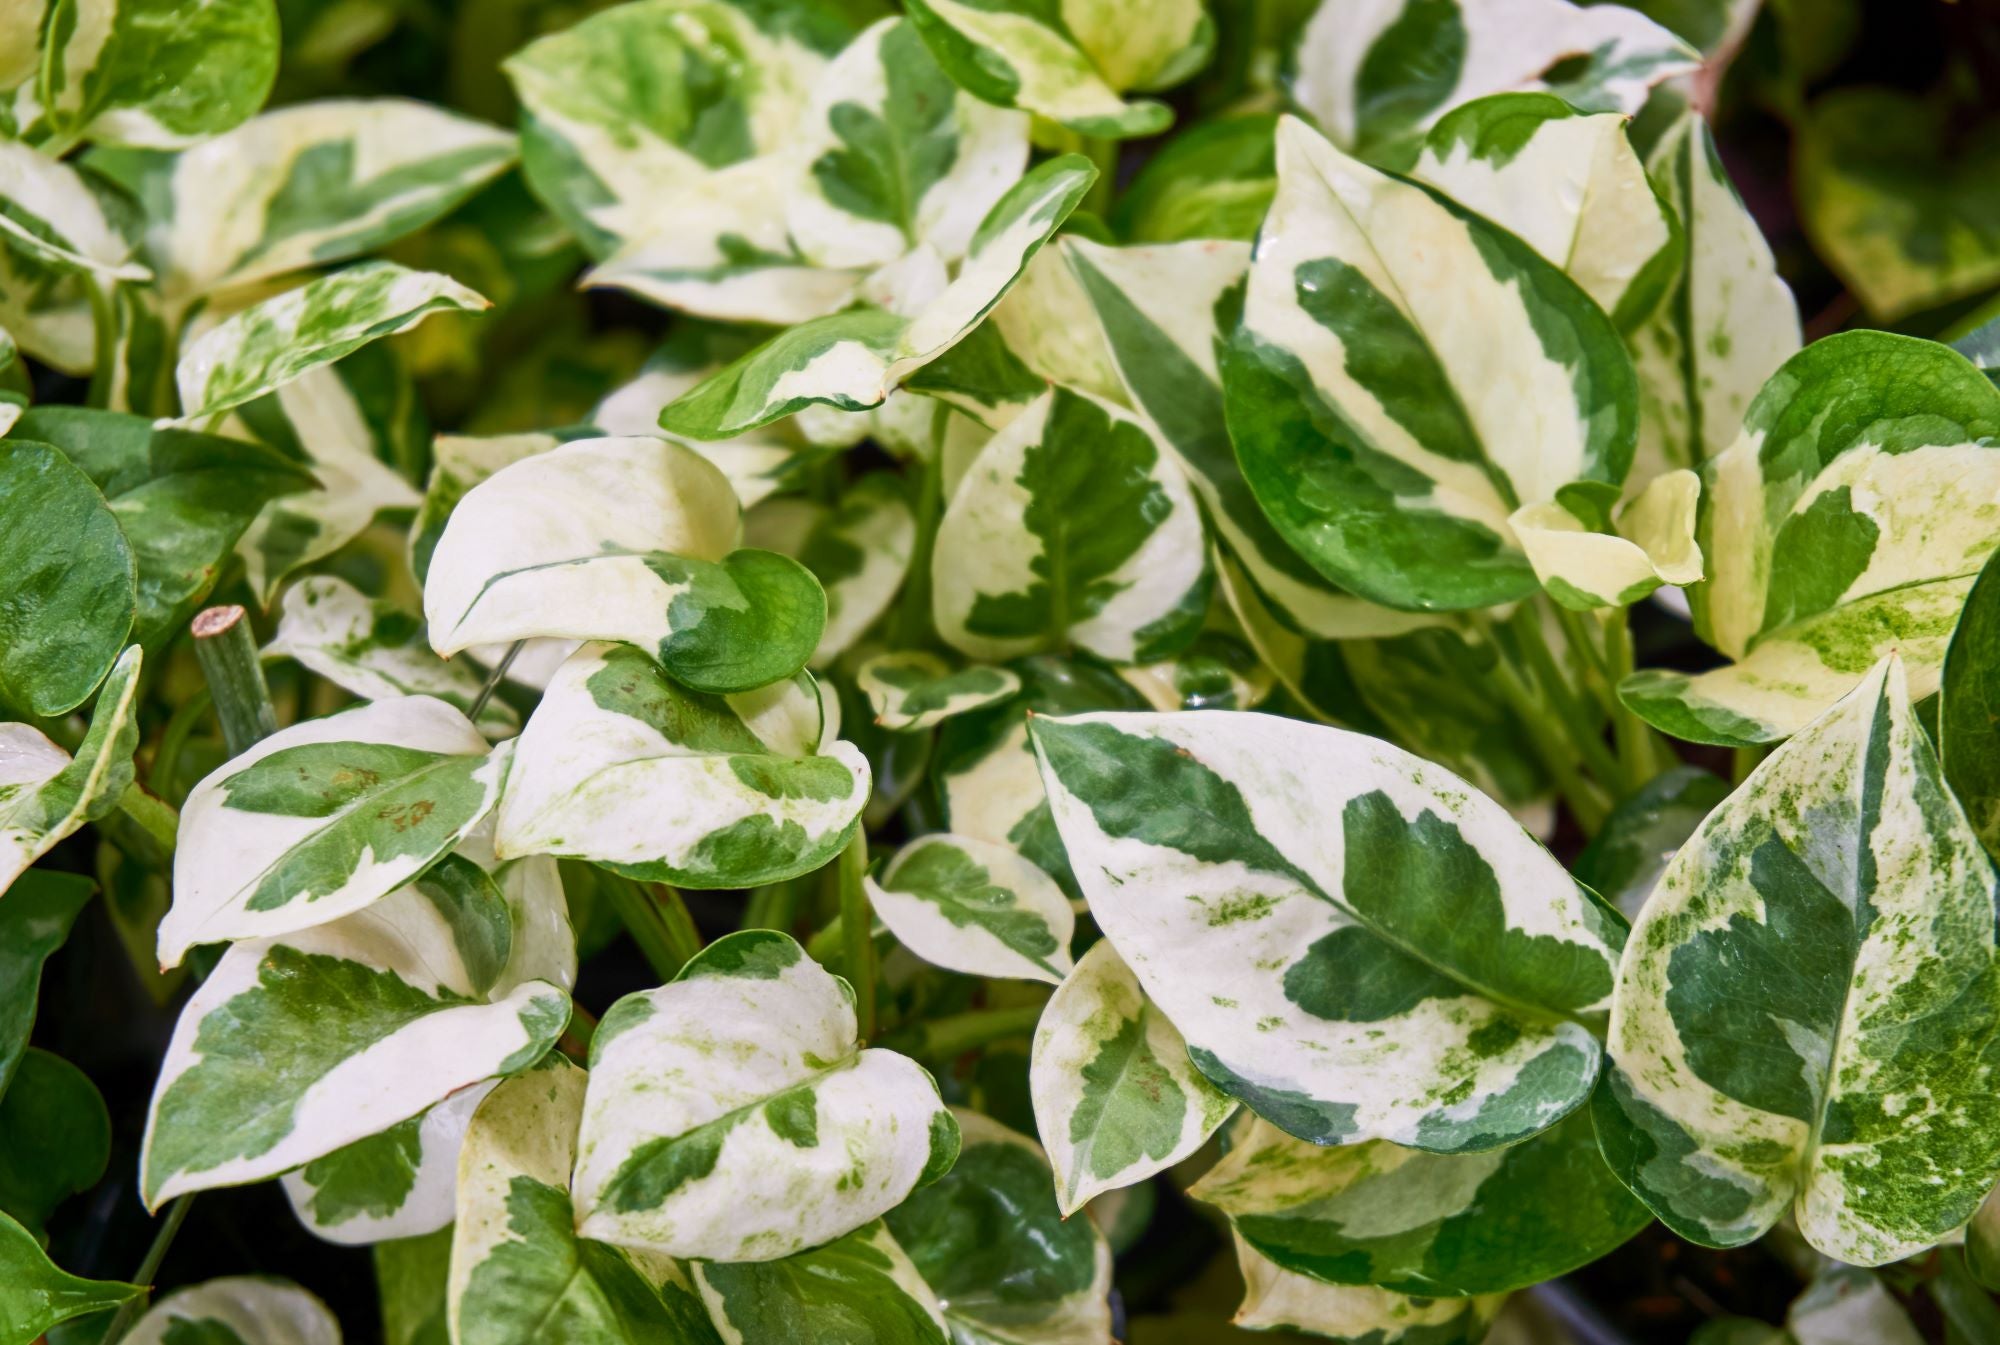 A beautiful ground cover of a pearls and joy pothos plant, featuring unique green and white variegation and speckled leaves. The pothos leaves appear lush and healthy.